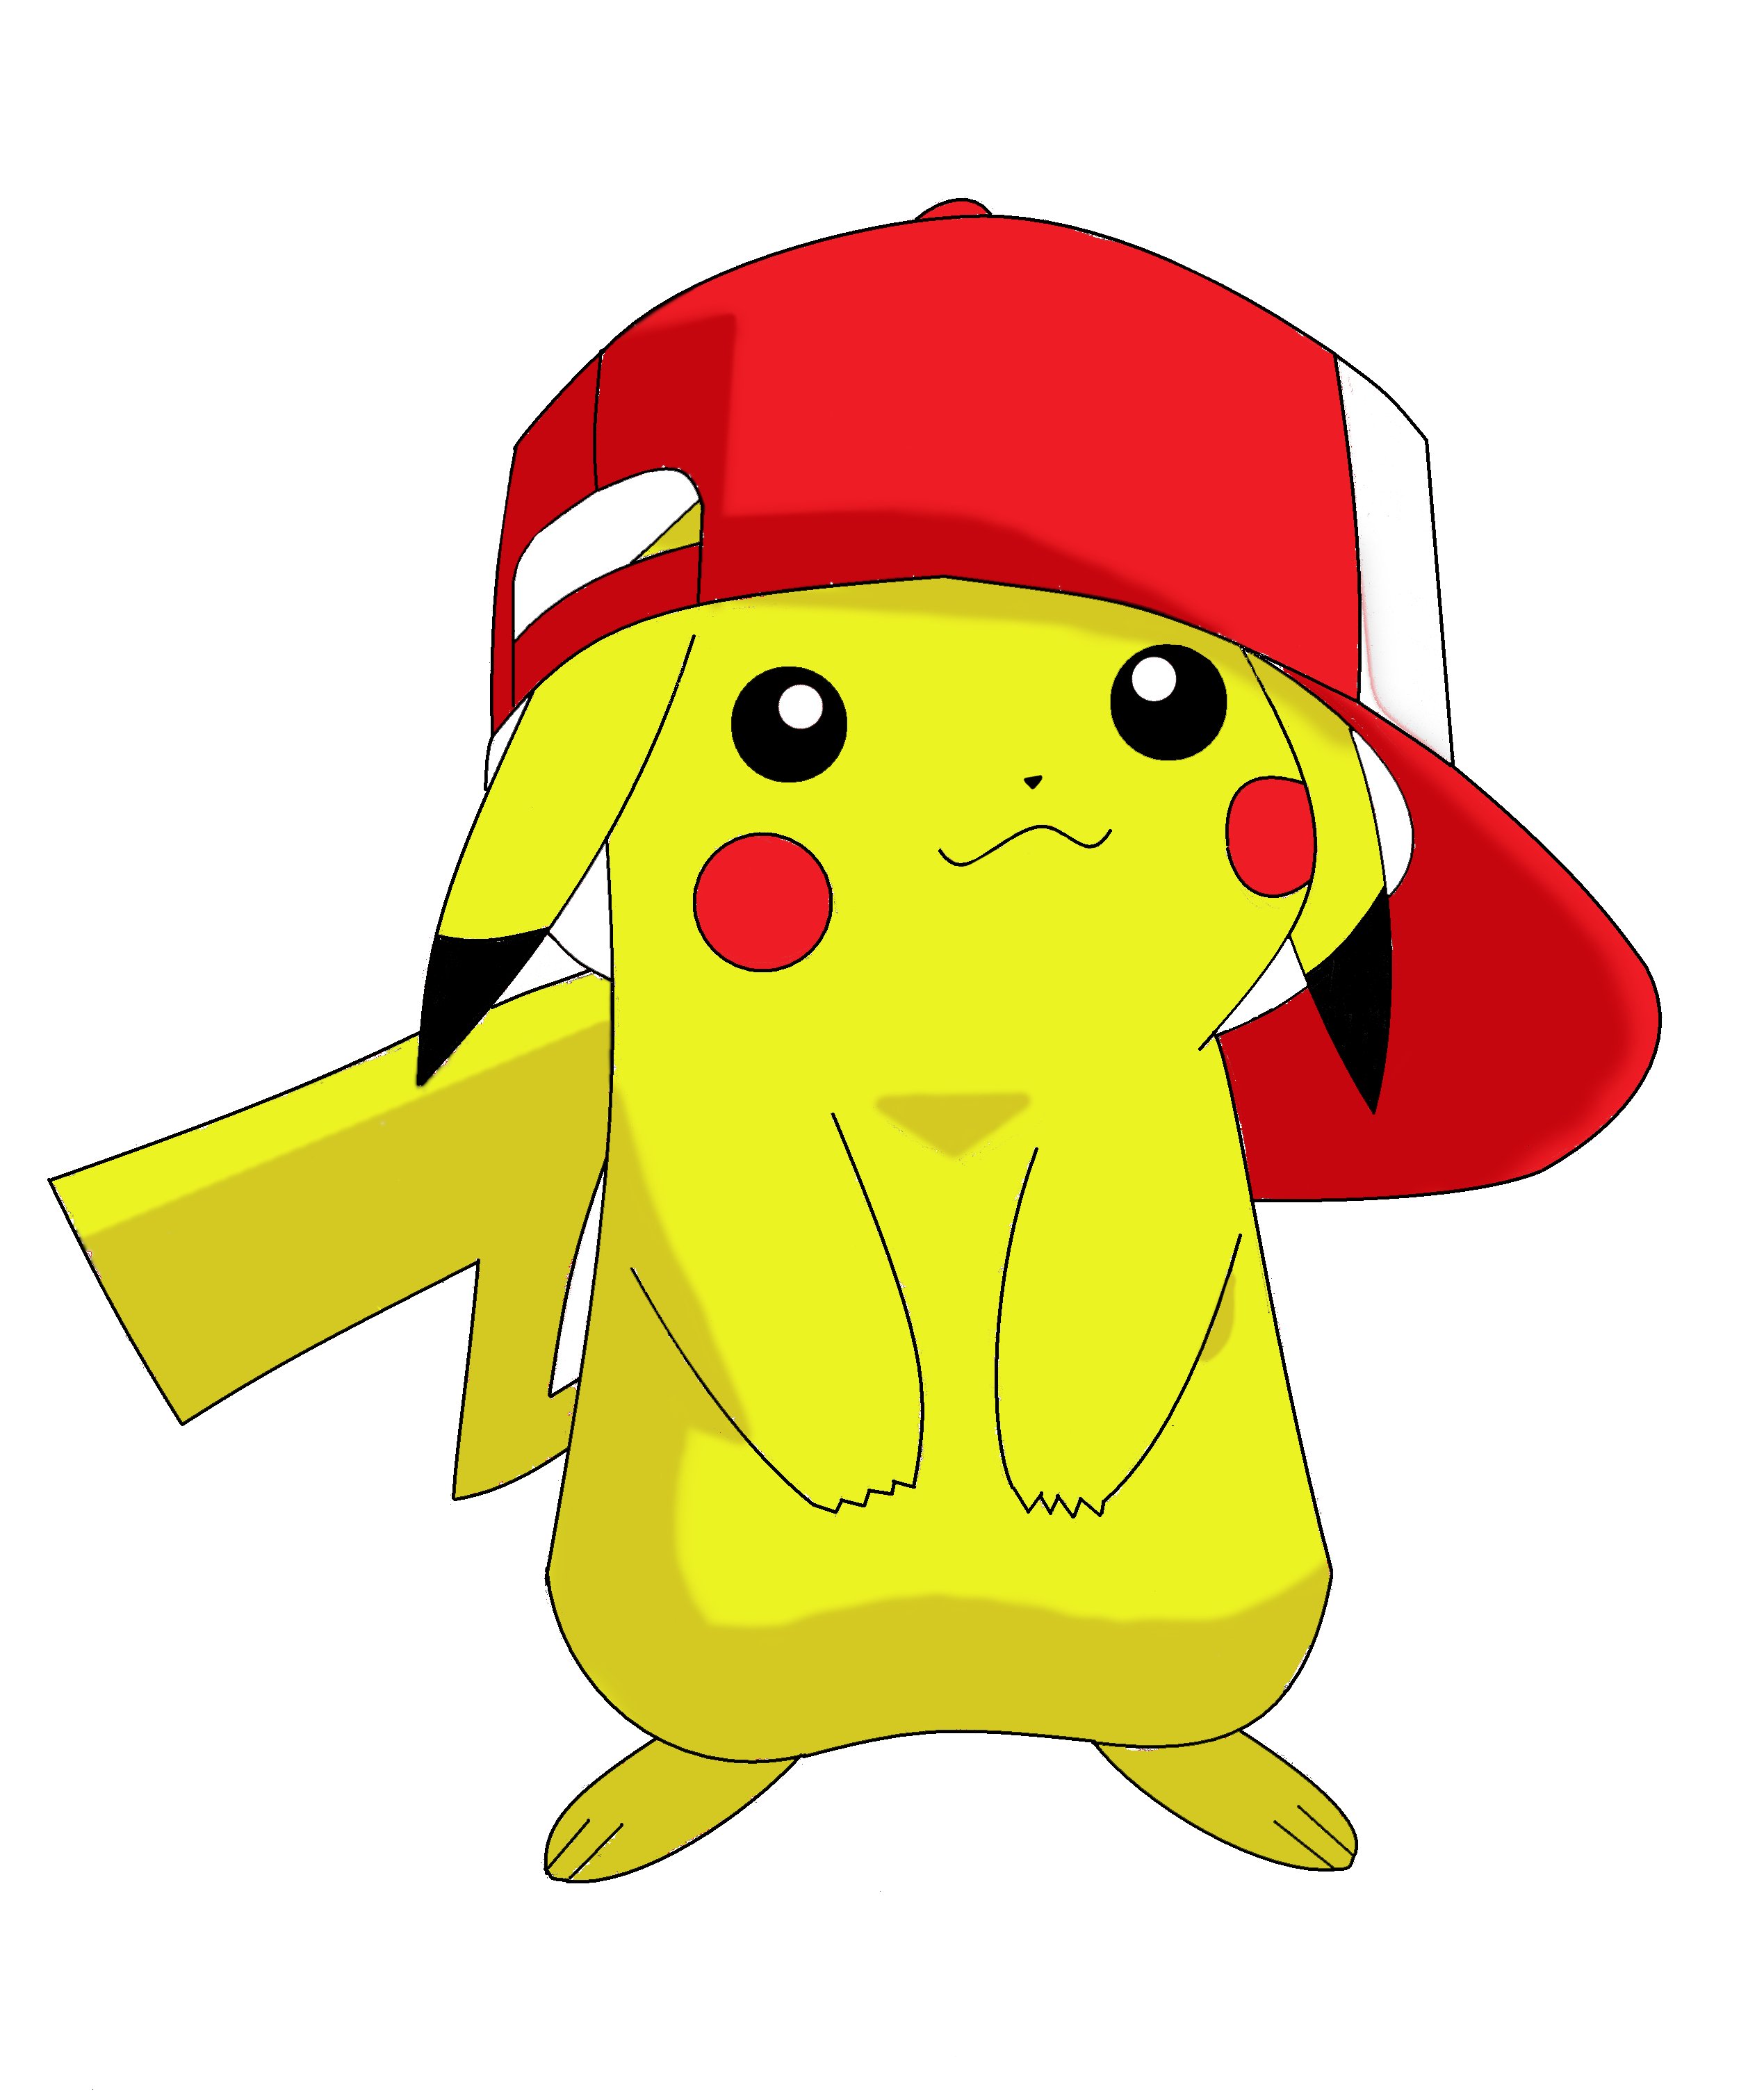 1000+ images about Pikachu